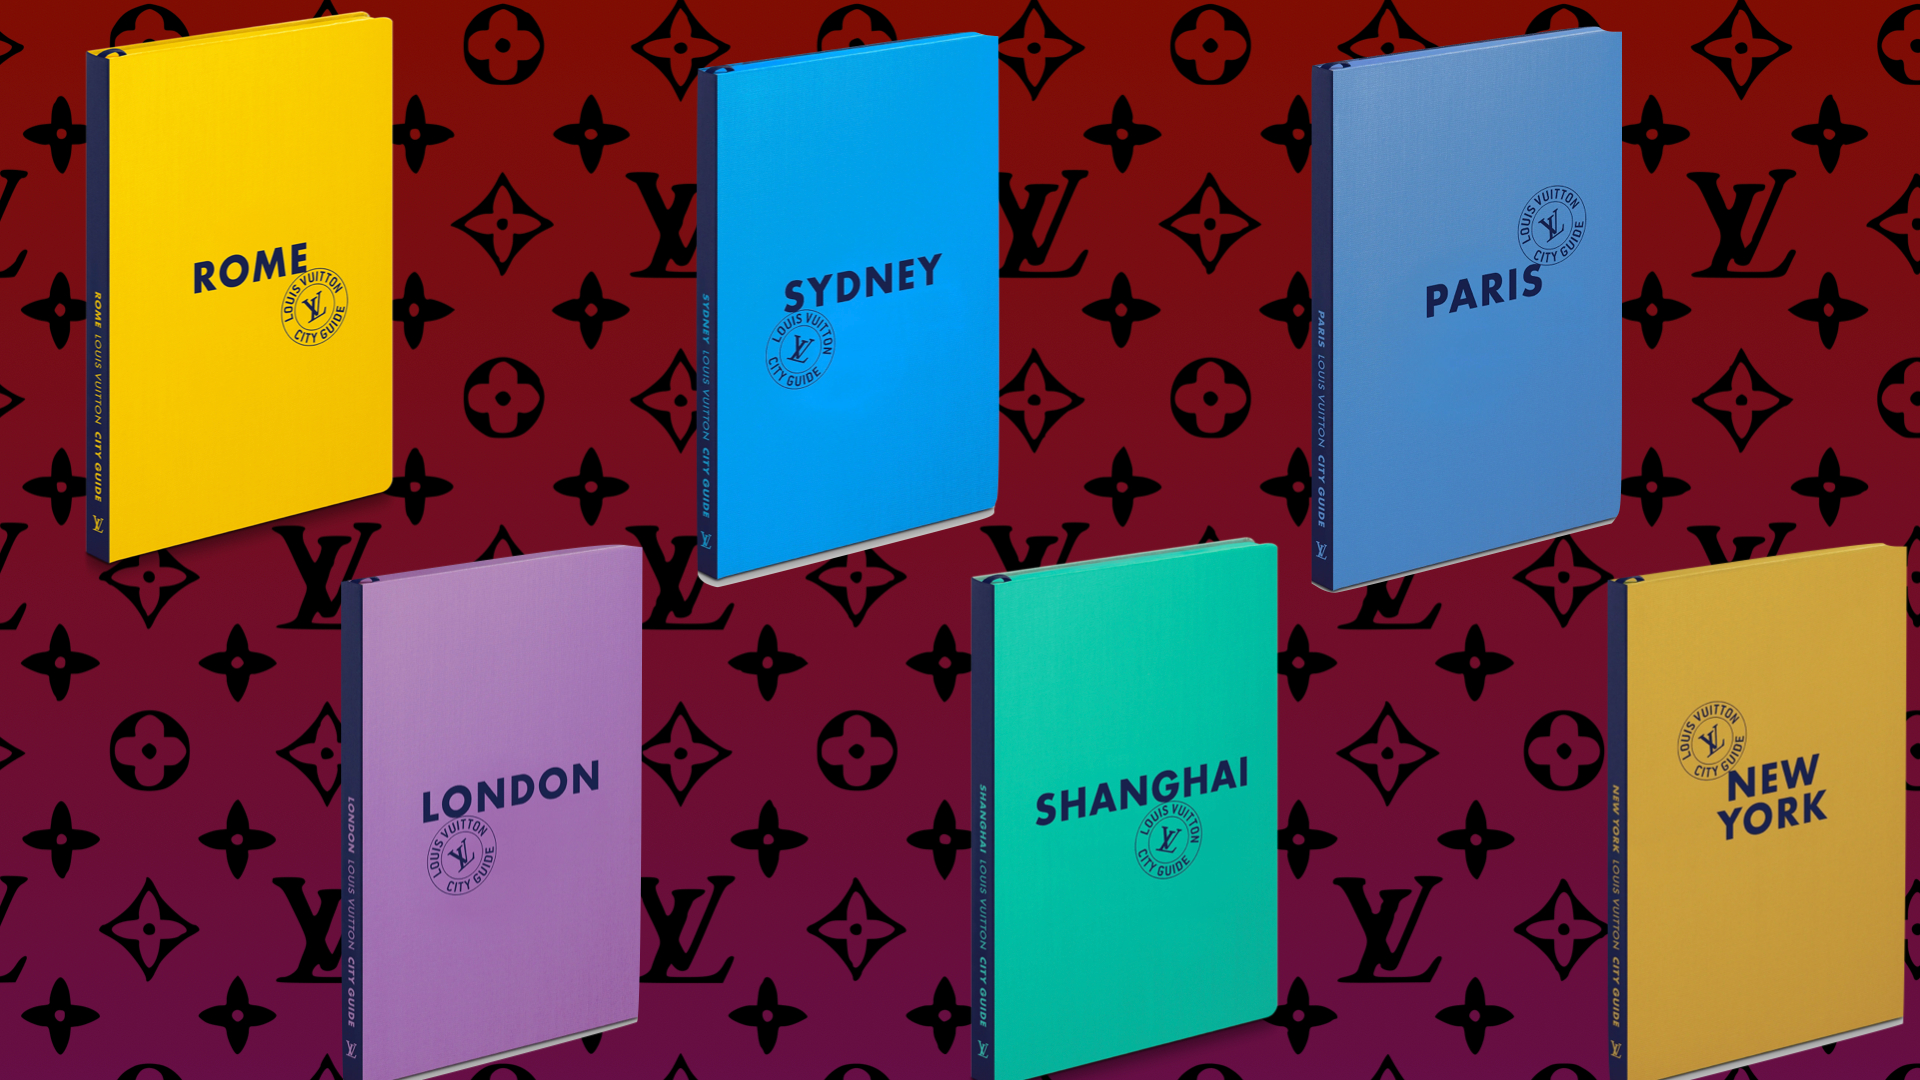 S'pore gets its own Louis Vuitton City Guide - TODAY